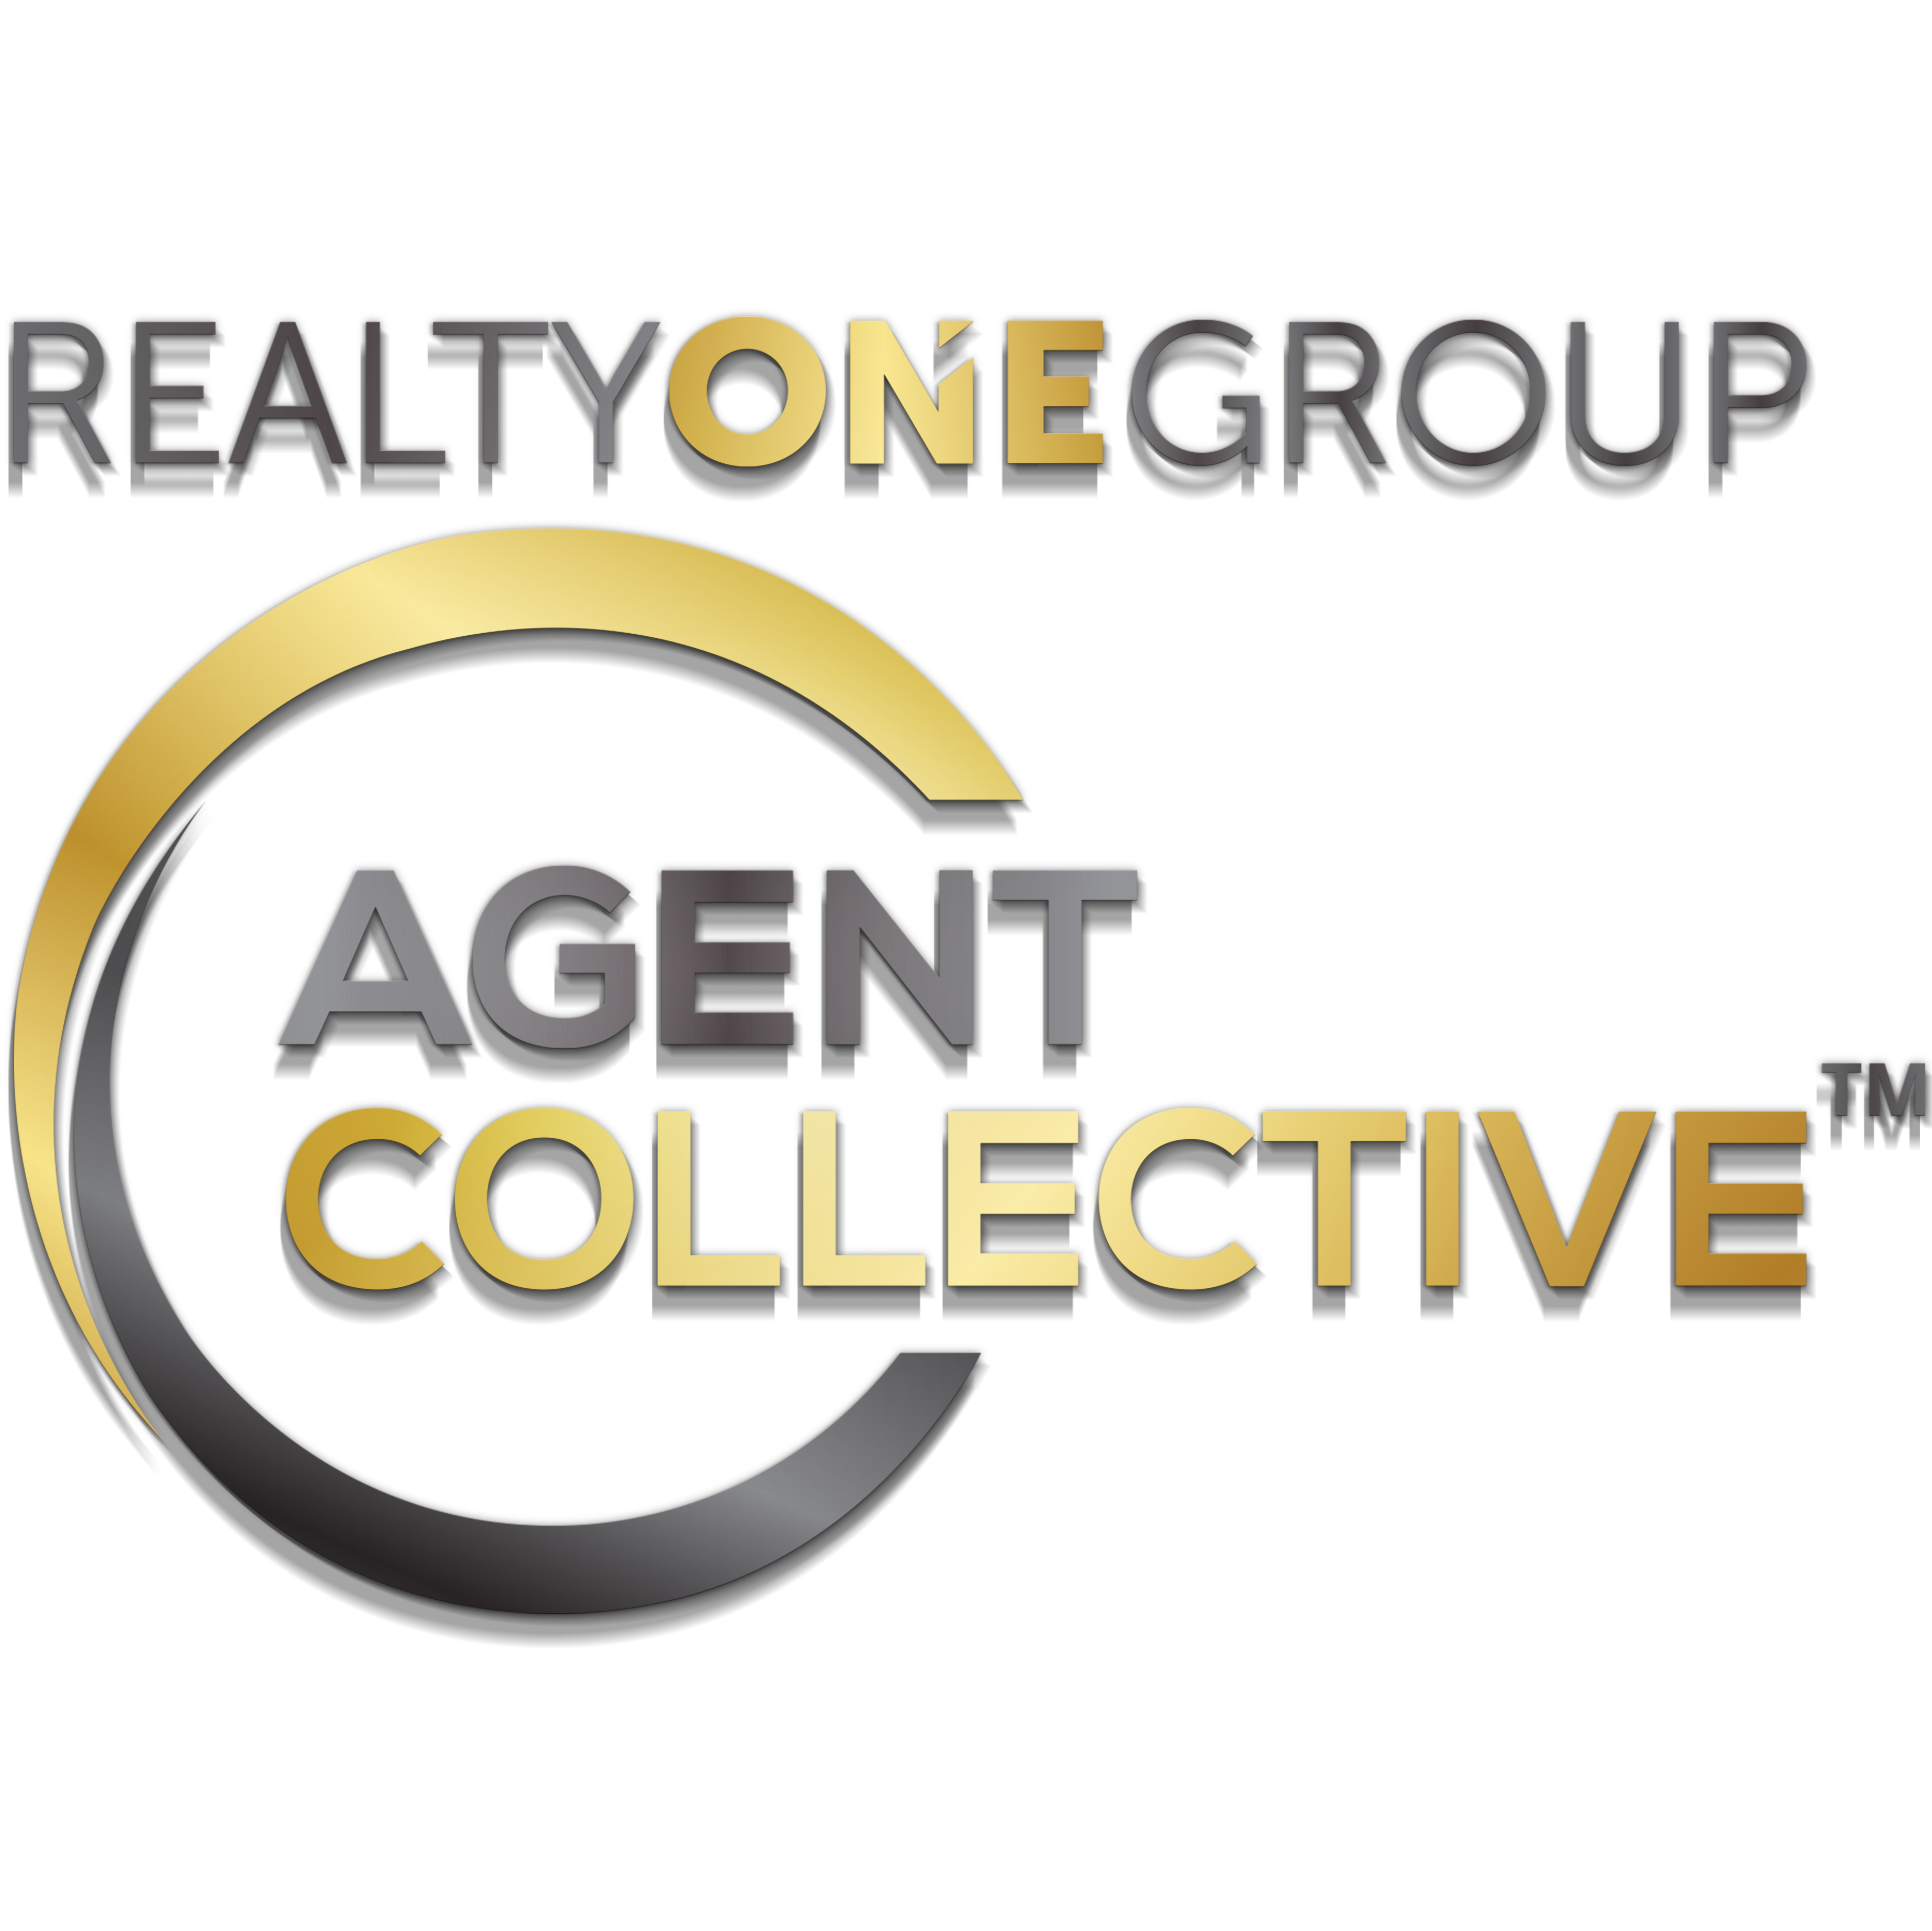 The Ultimate Real Estate Team